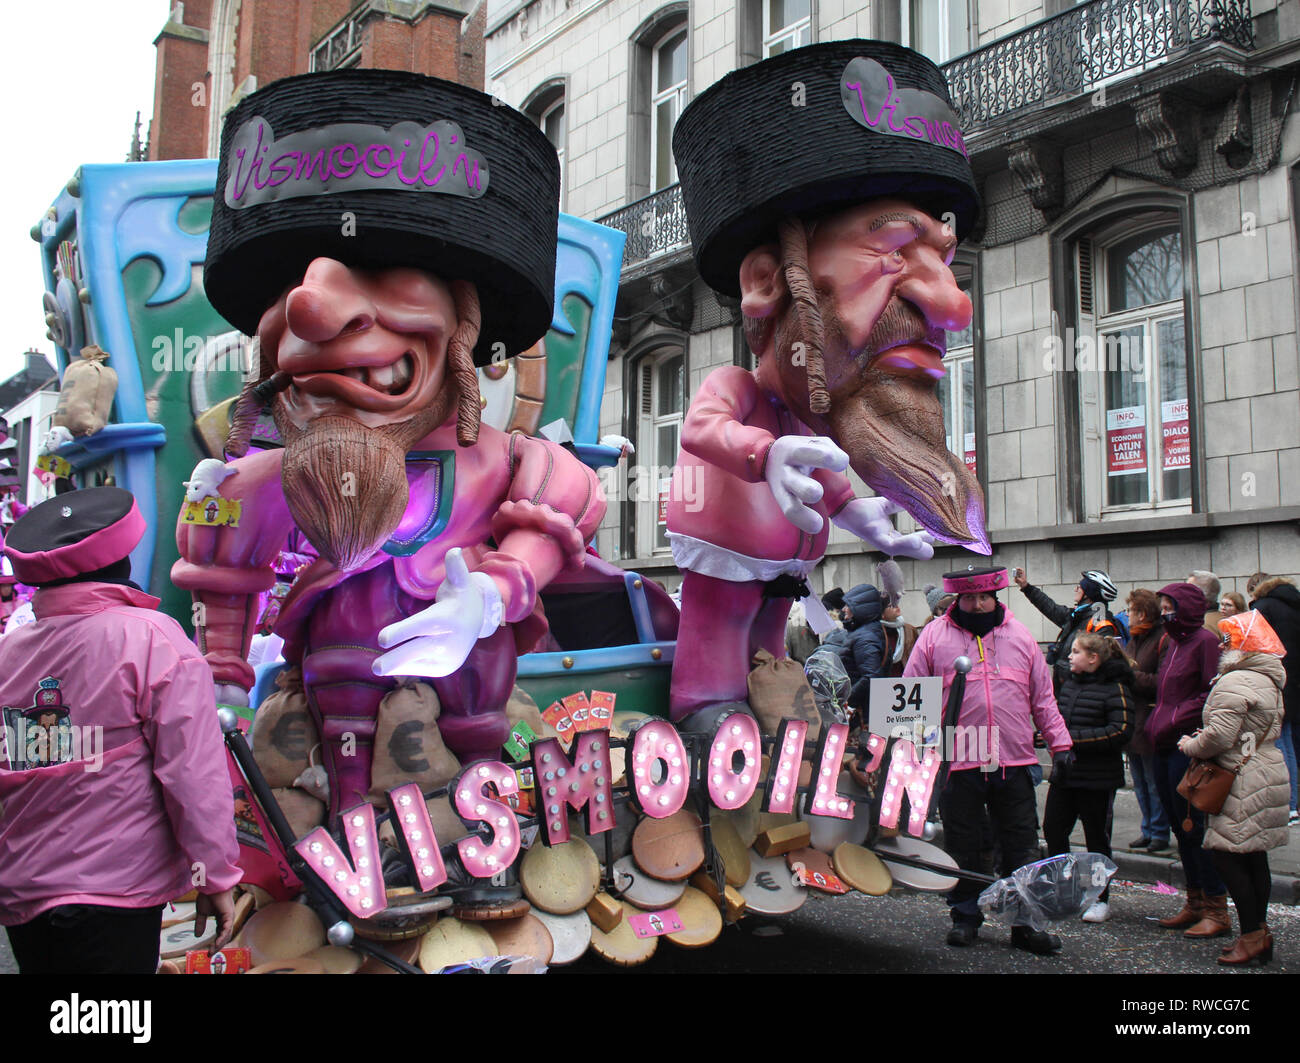 AALST, BELGIUM, 3 MARCH 2019: The carnival float of the Vismooiln during the annual carnival parade in Aalst. It is a UNESCO recognized event of Intan Stock Photo